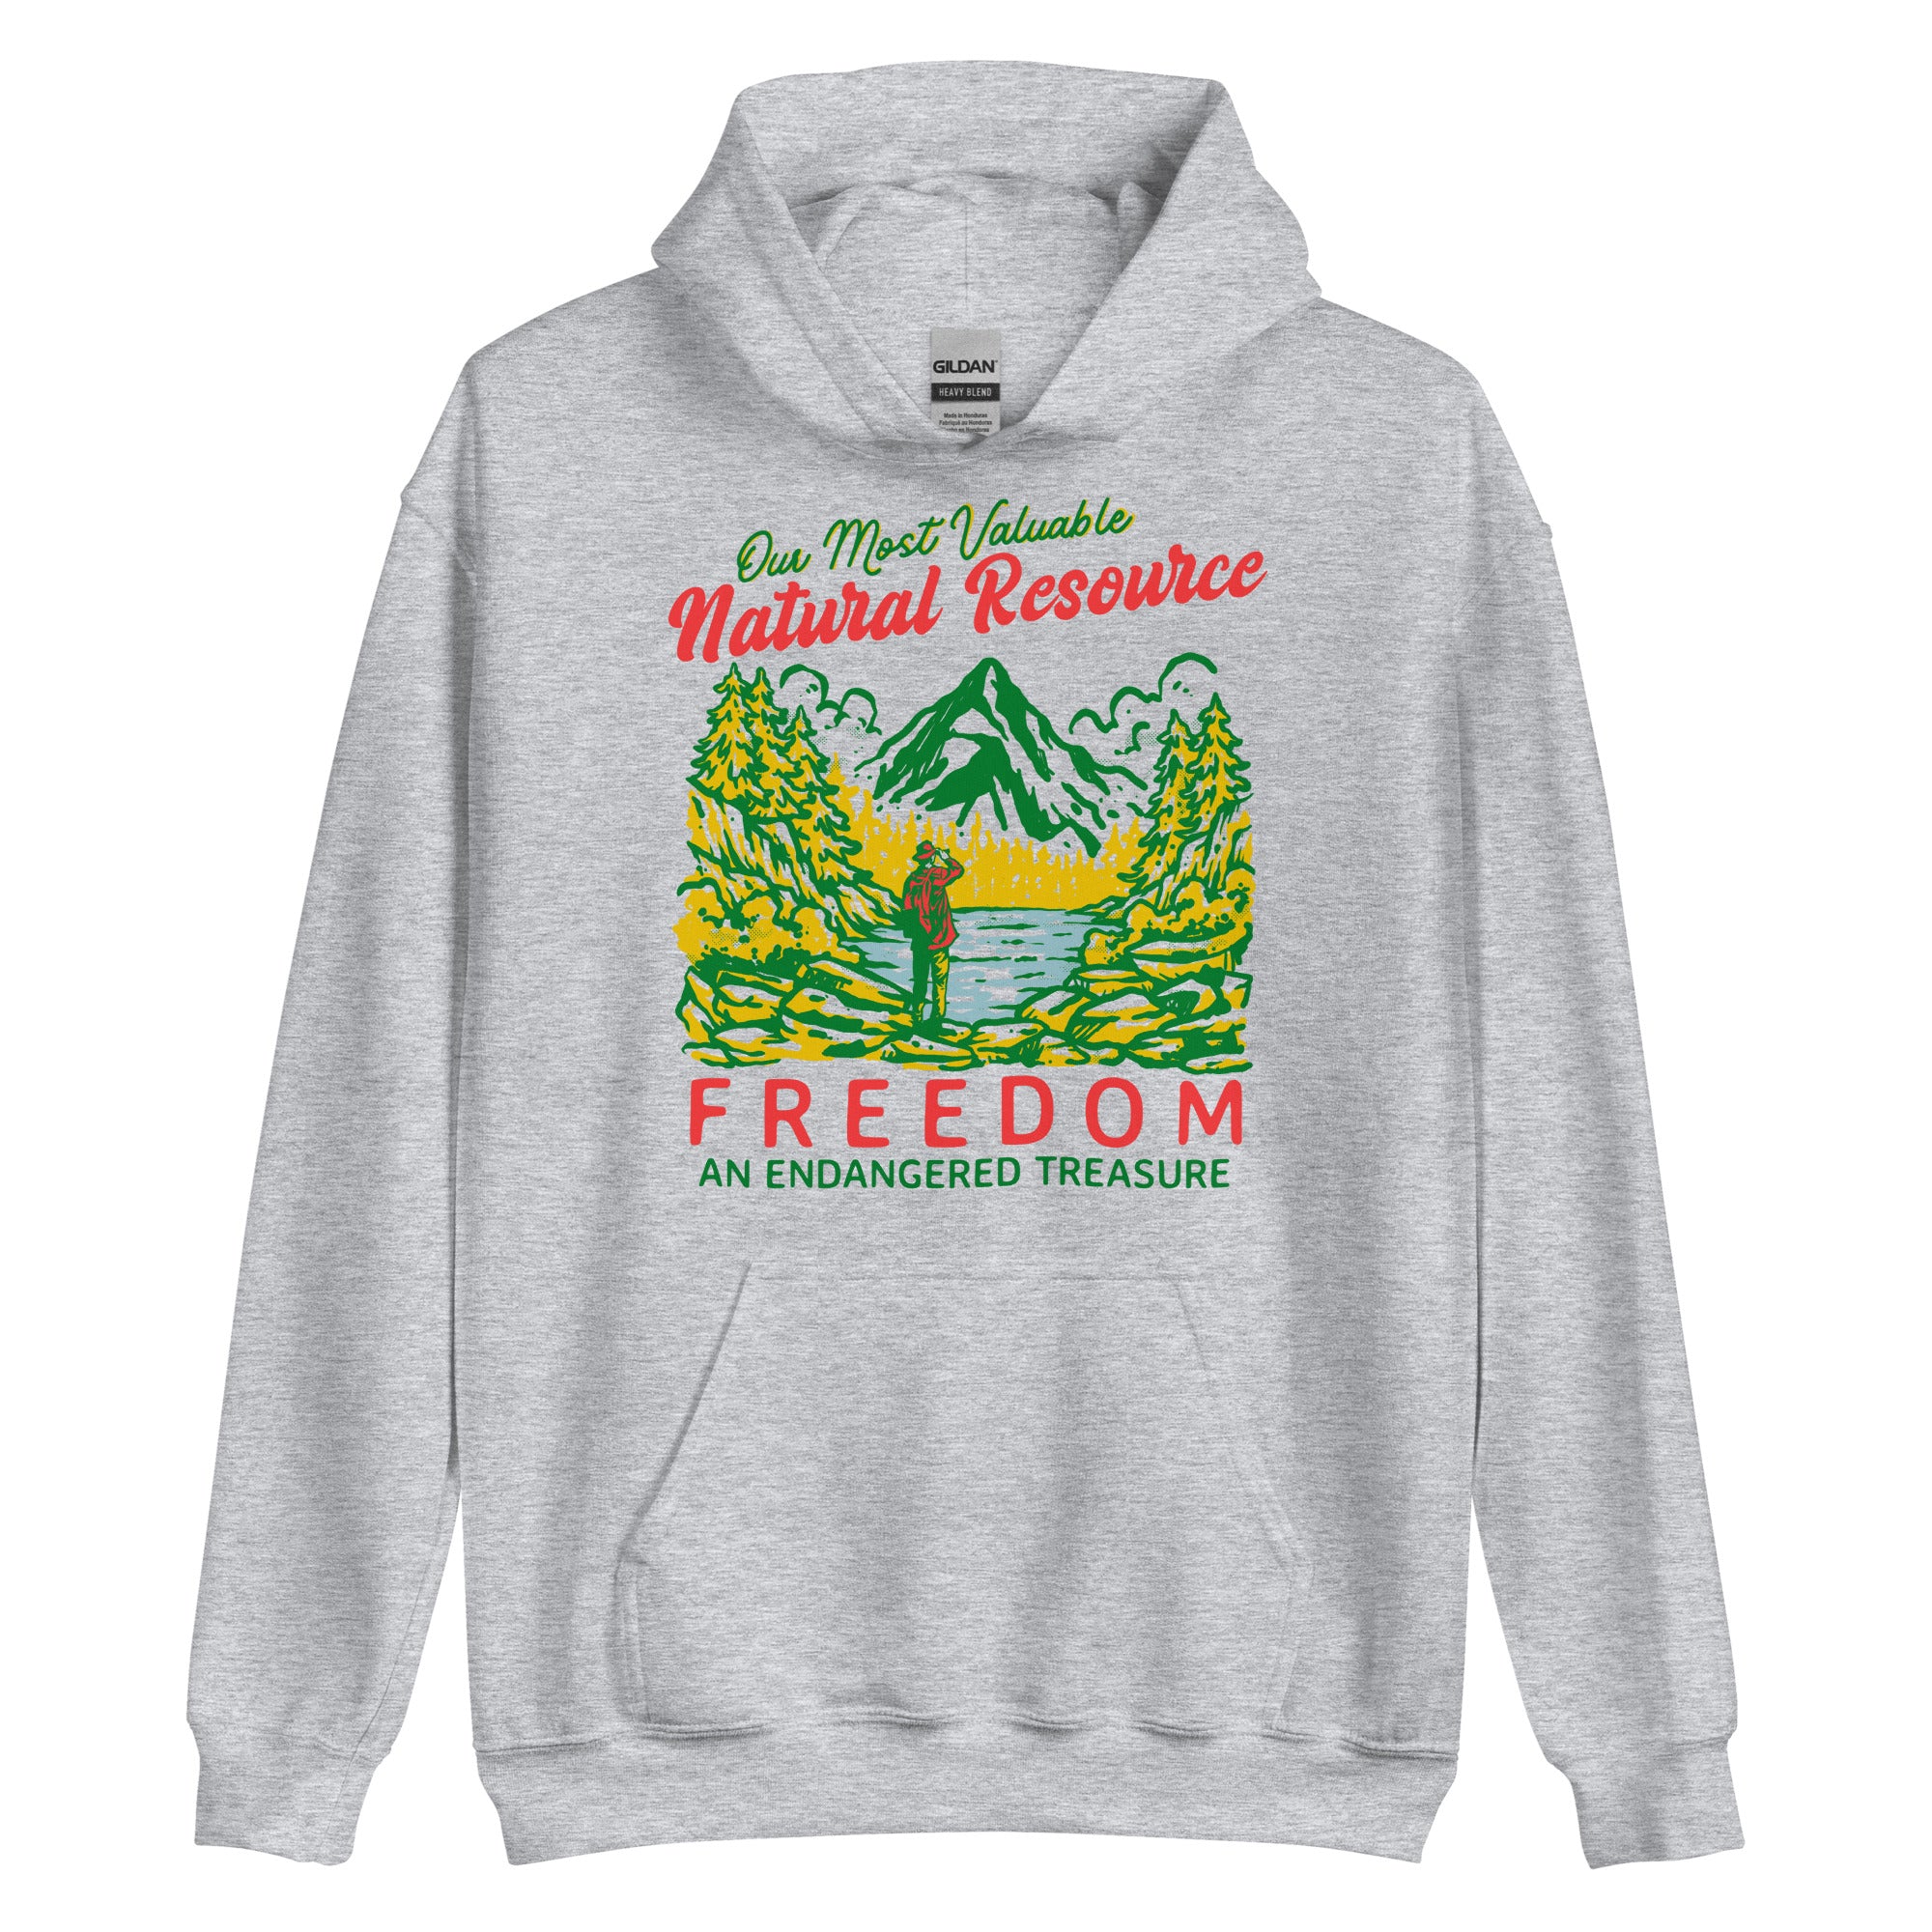 Our Most Valuable Natural Resource Freedom Hoodie